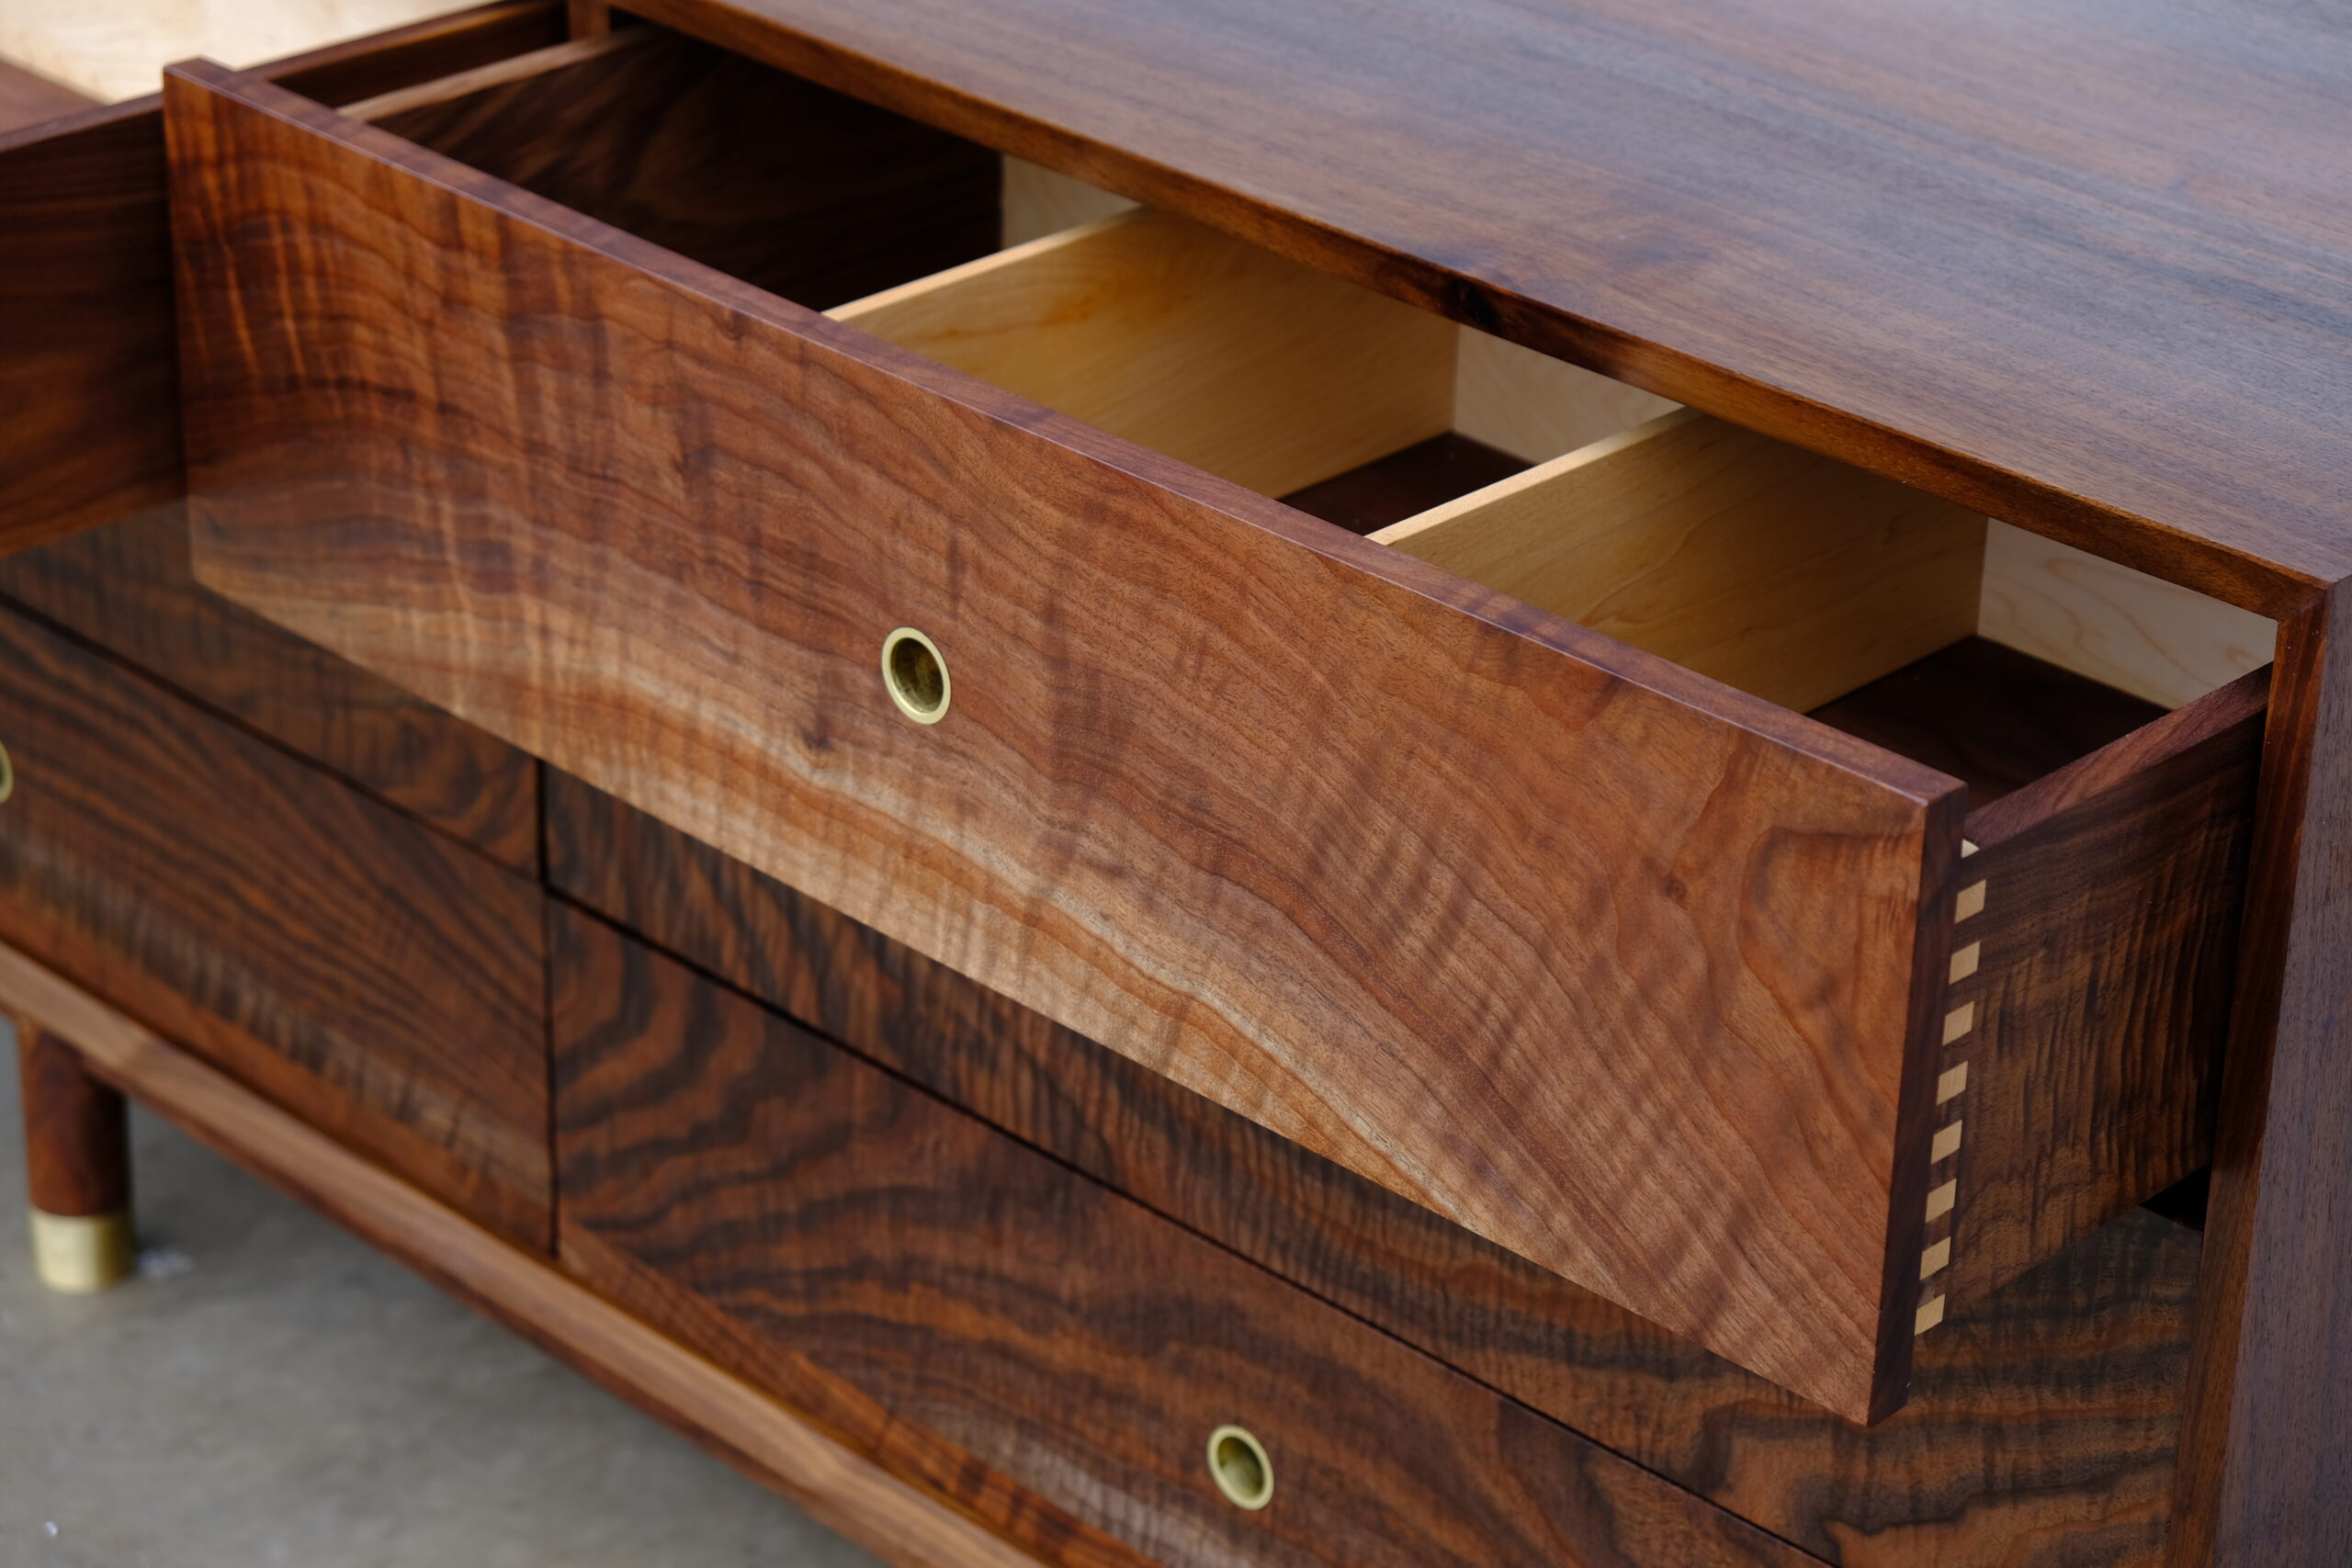 Close up of an open drawer with dividers and an inlaid brass pull.